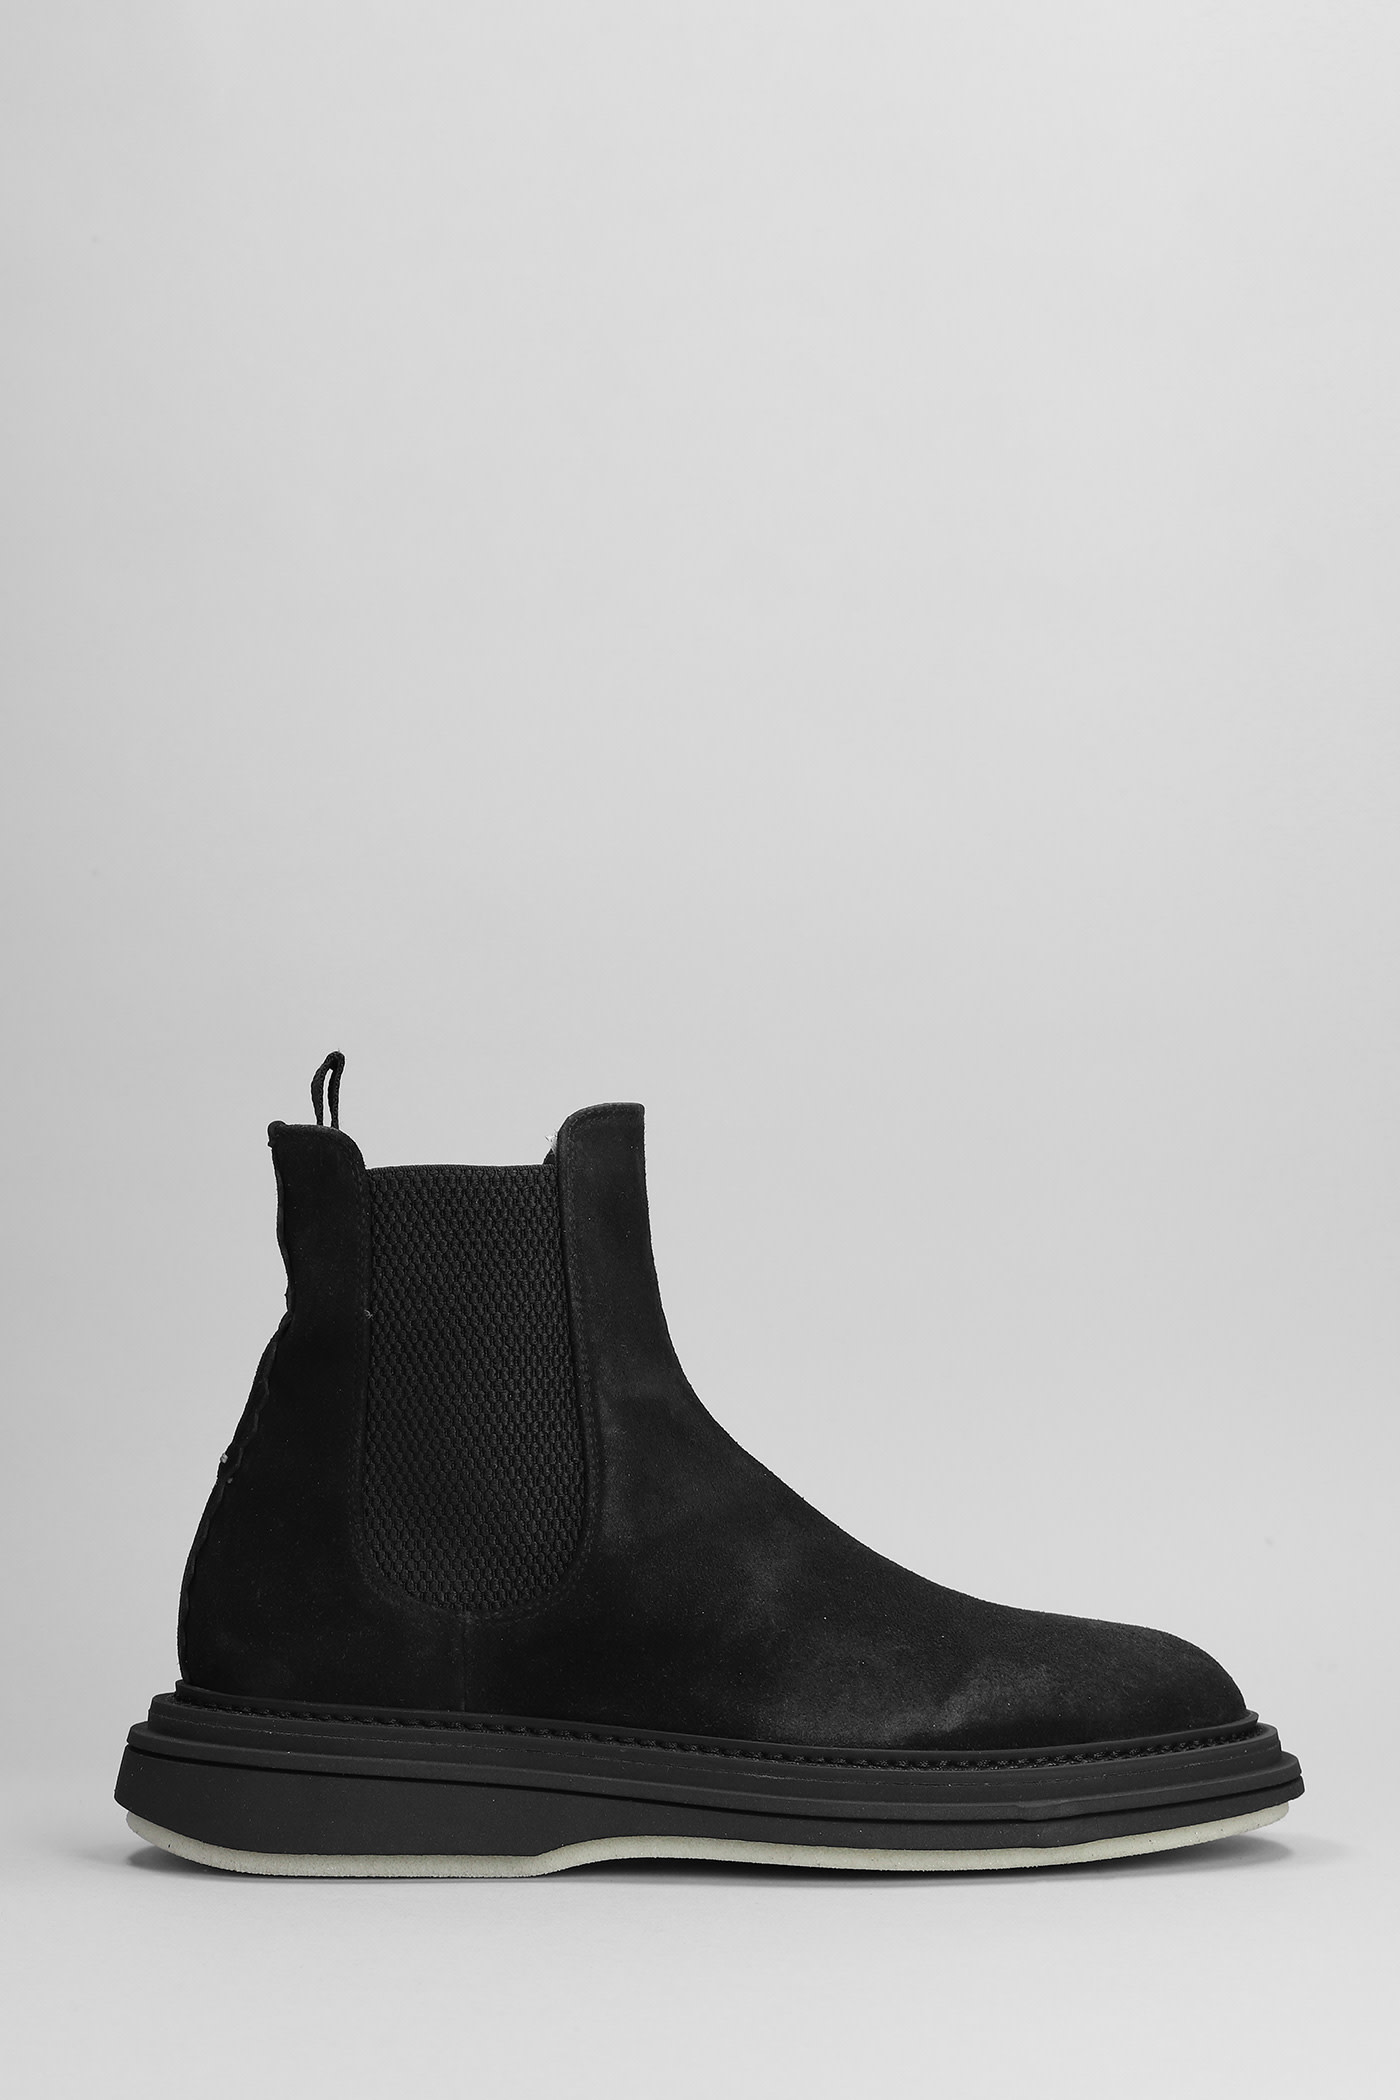 THE ANTIPODE VICTOR LOW HEELS ANKLE BOOTS IN BLACK SUEDE